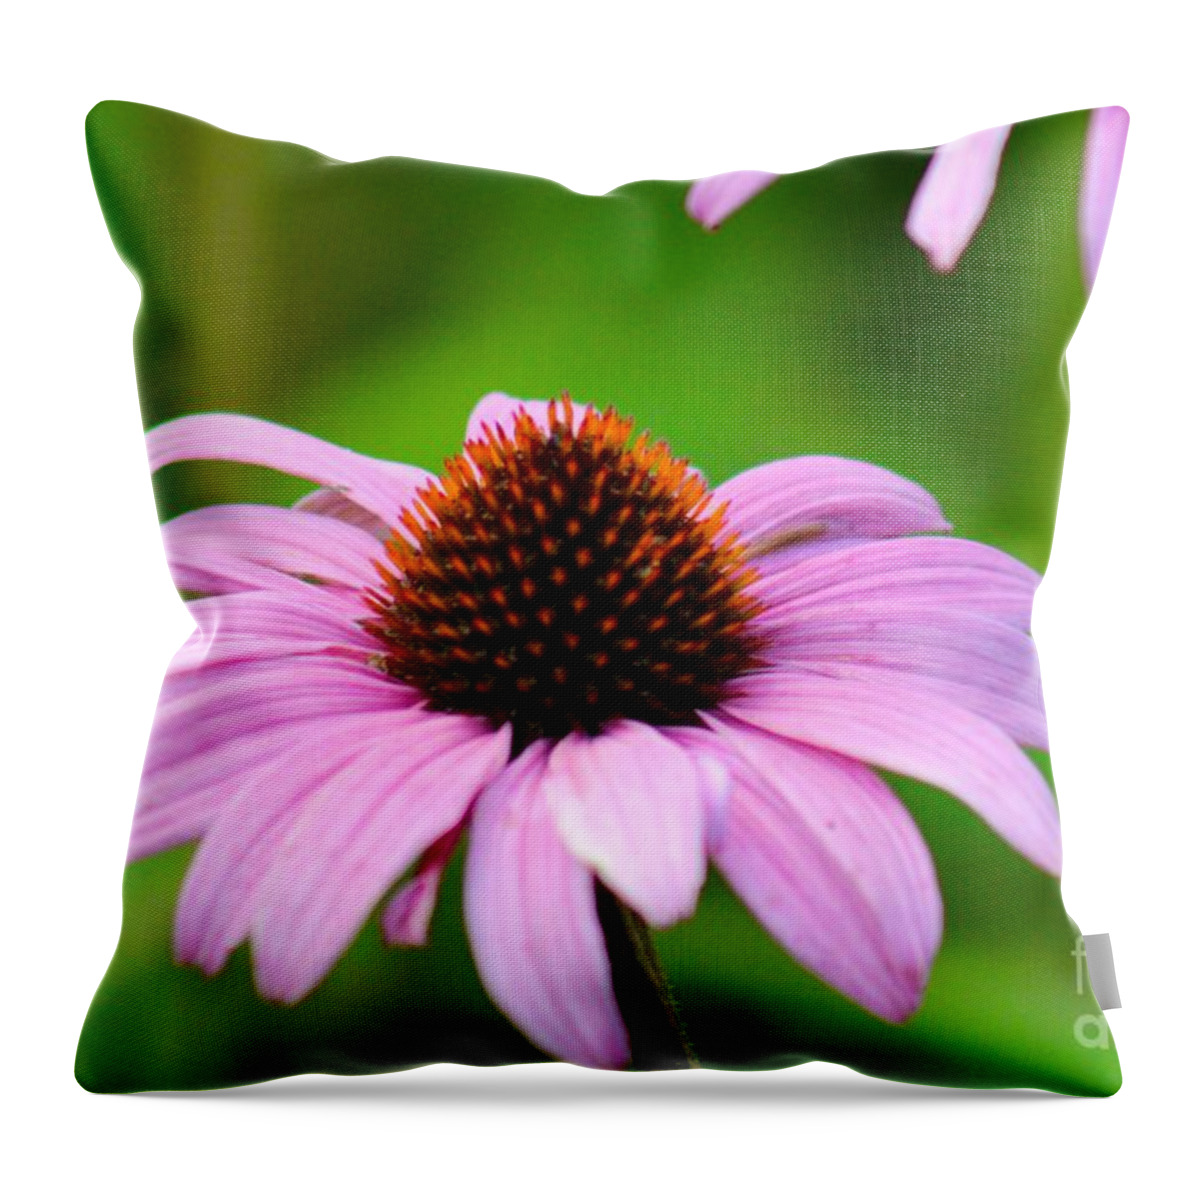 Pink Throw Pillow featuring the photograph Nature's Beauty 86 by Deena Withycombe